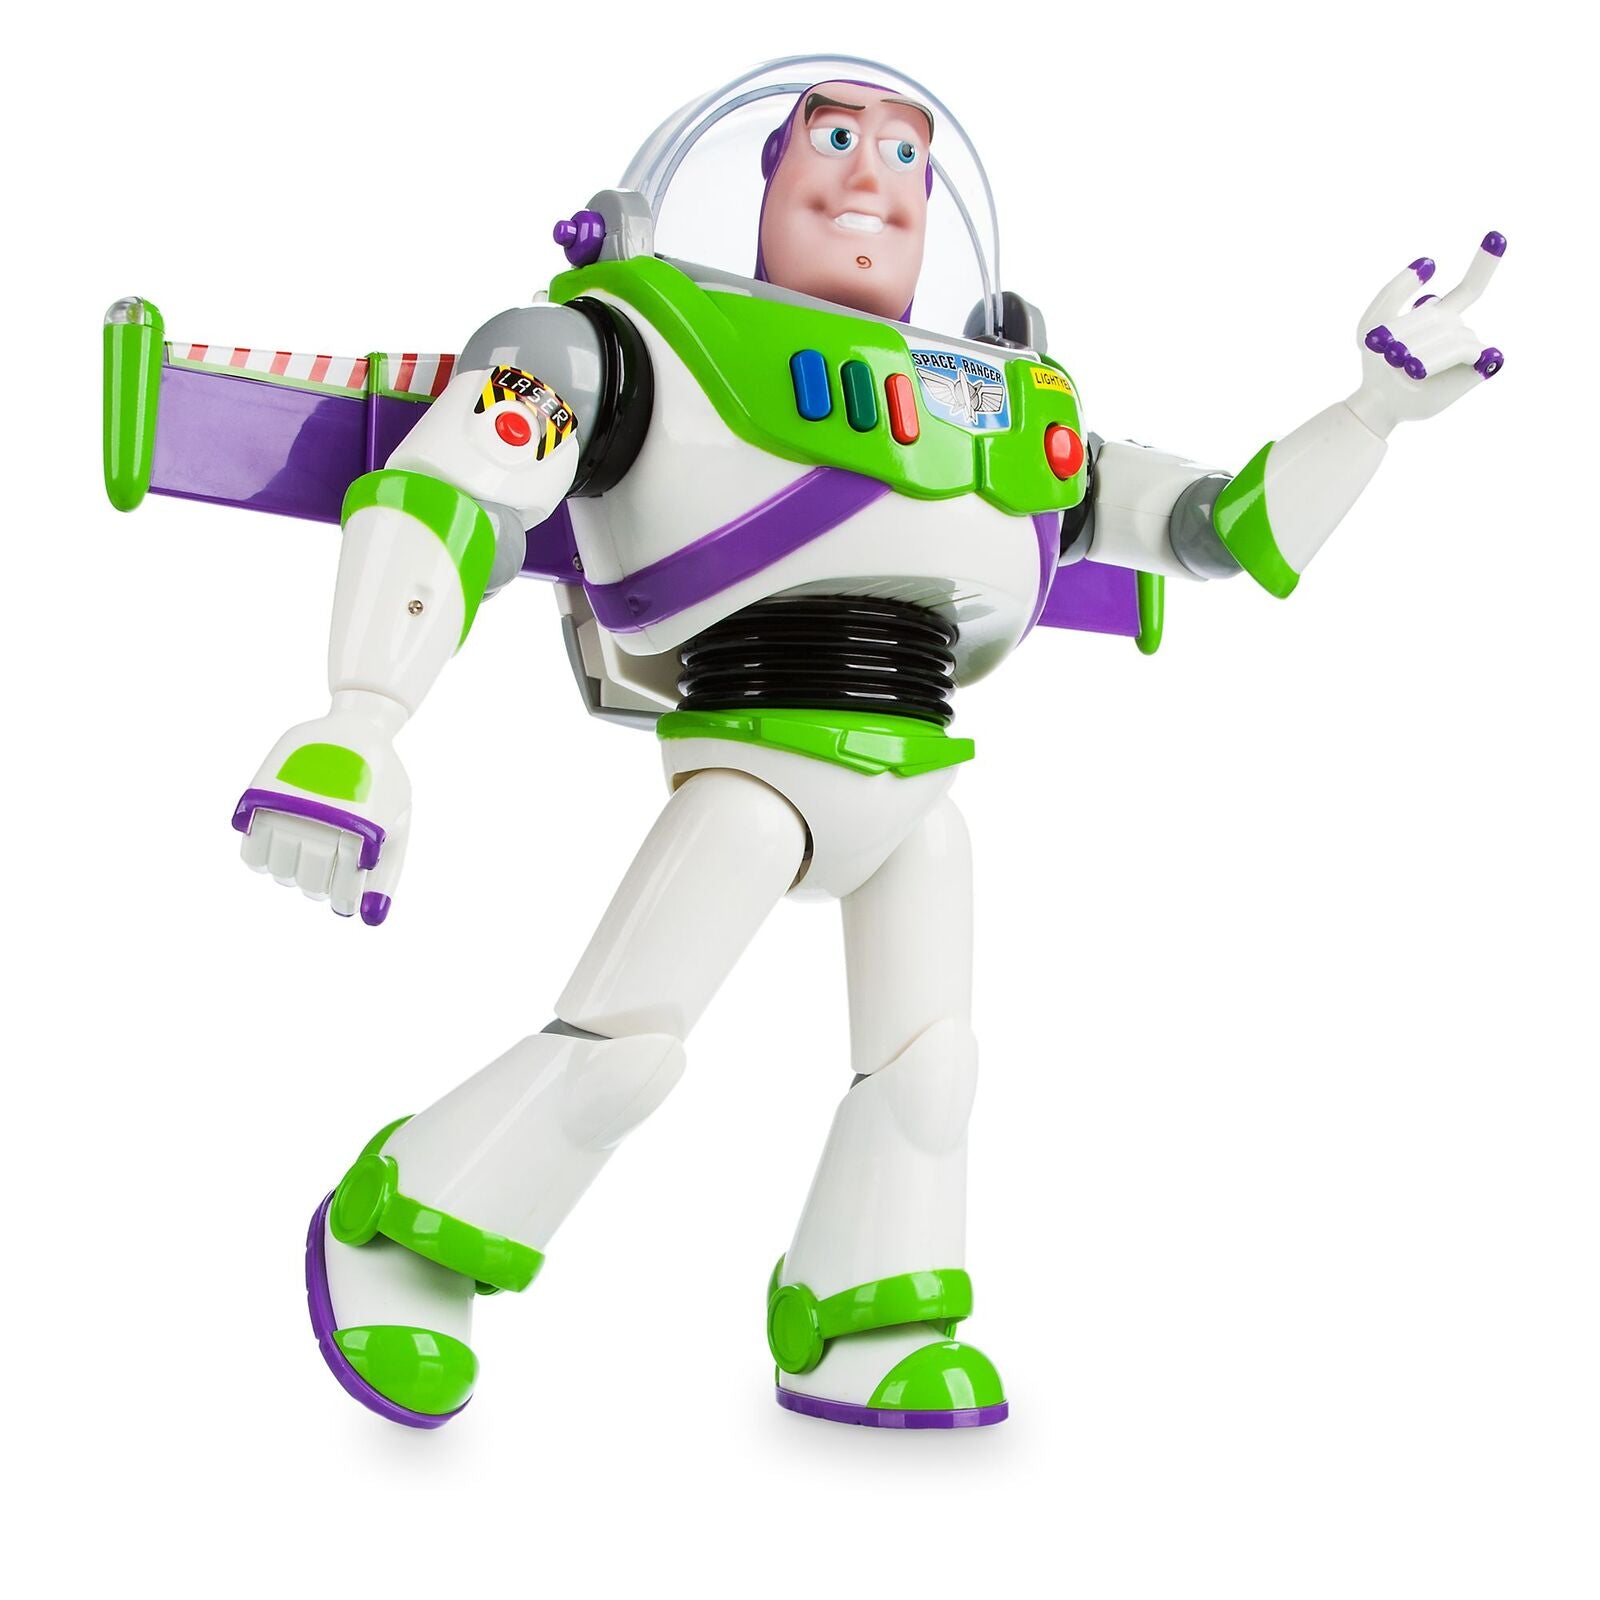 Toy Story Interactive Talking Action Figure - Buzz Lightyear